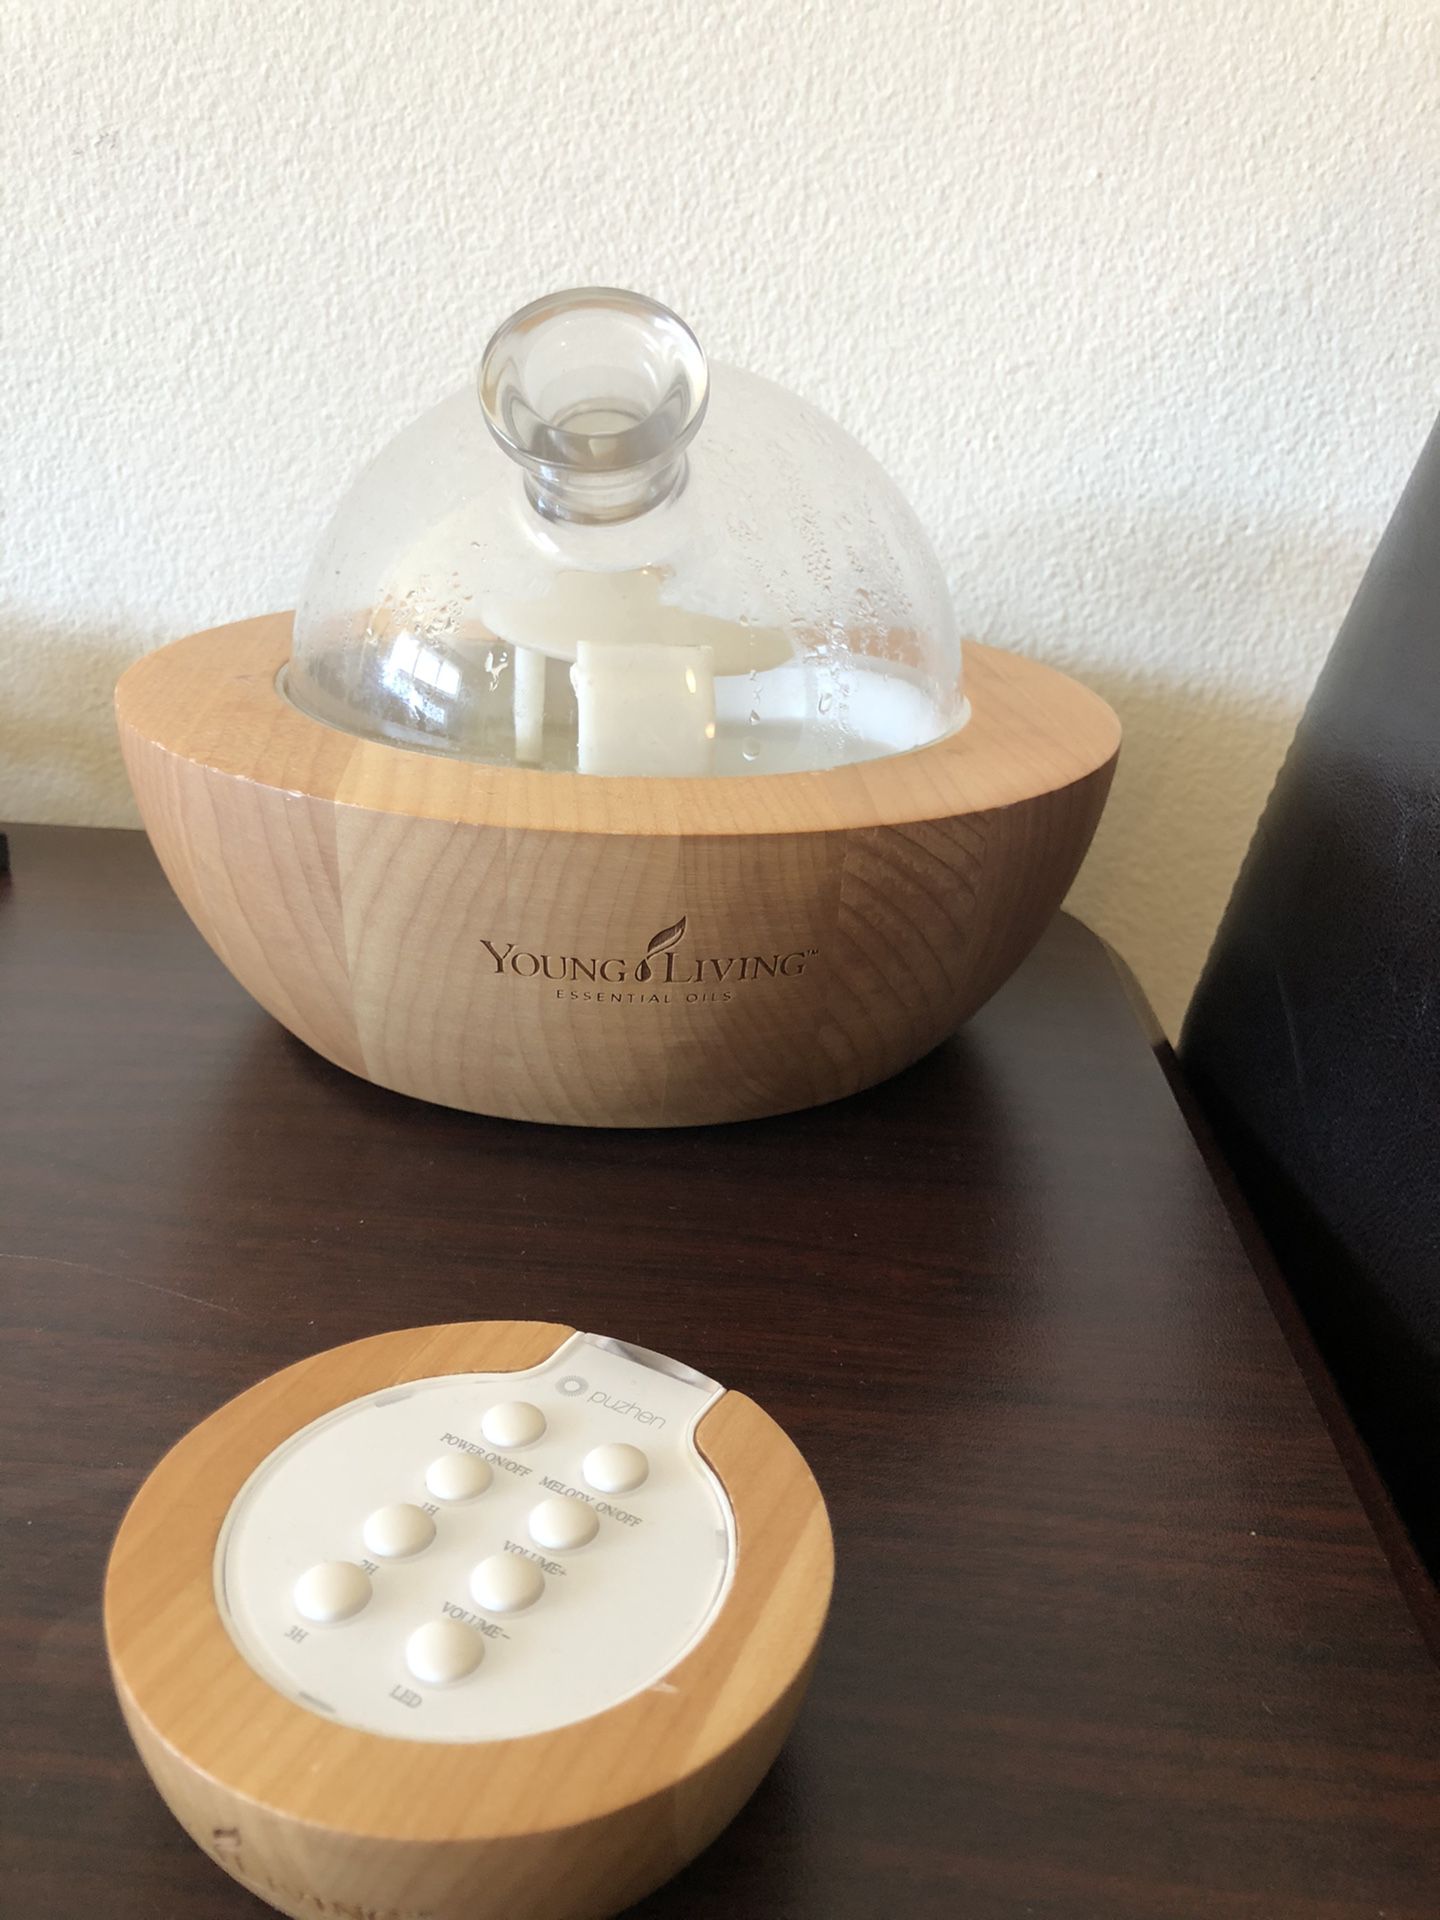 Aria Young Living diffuser